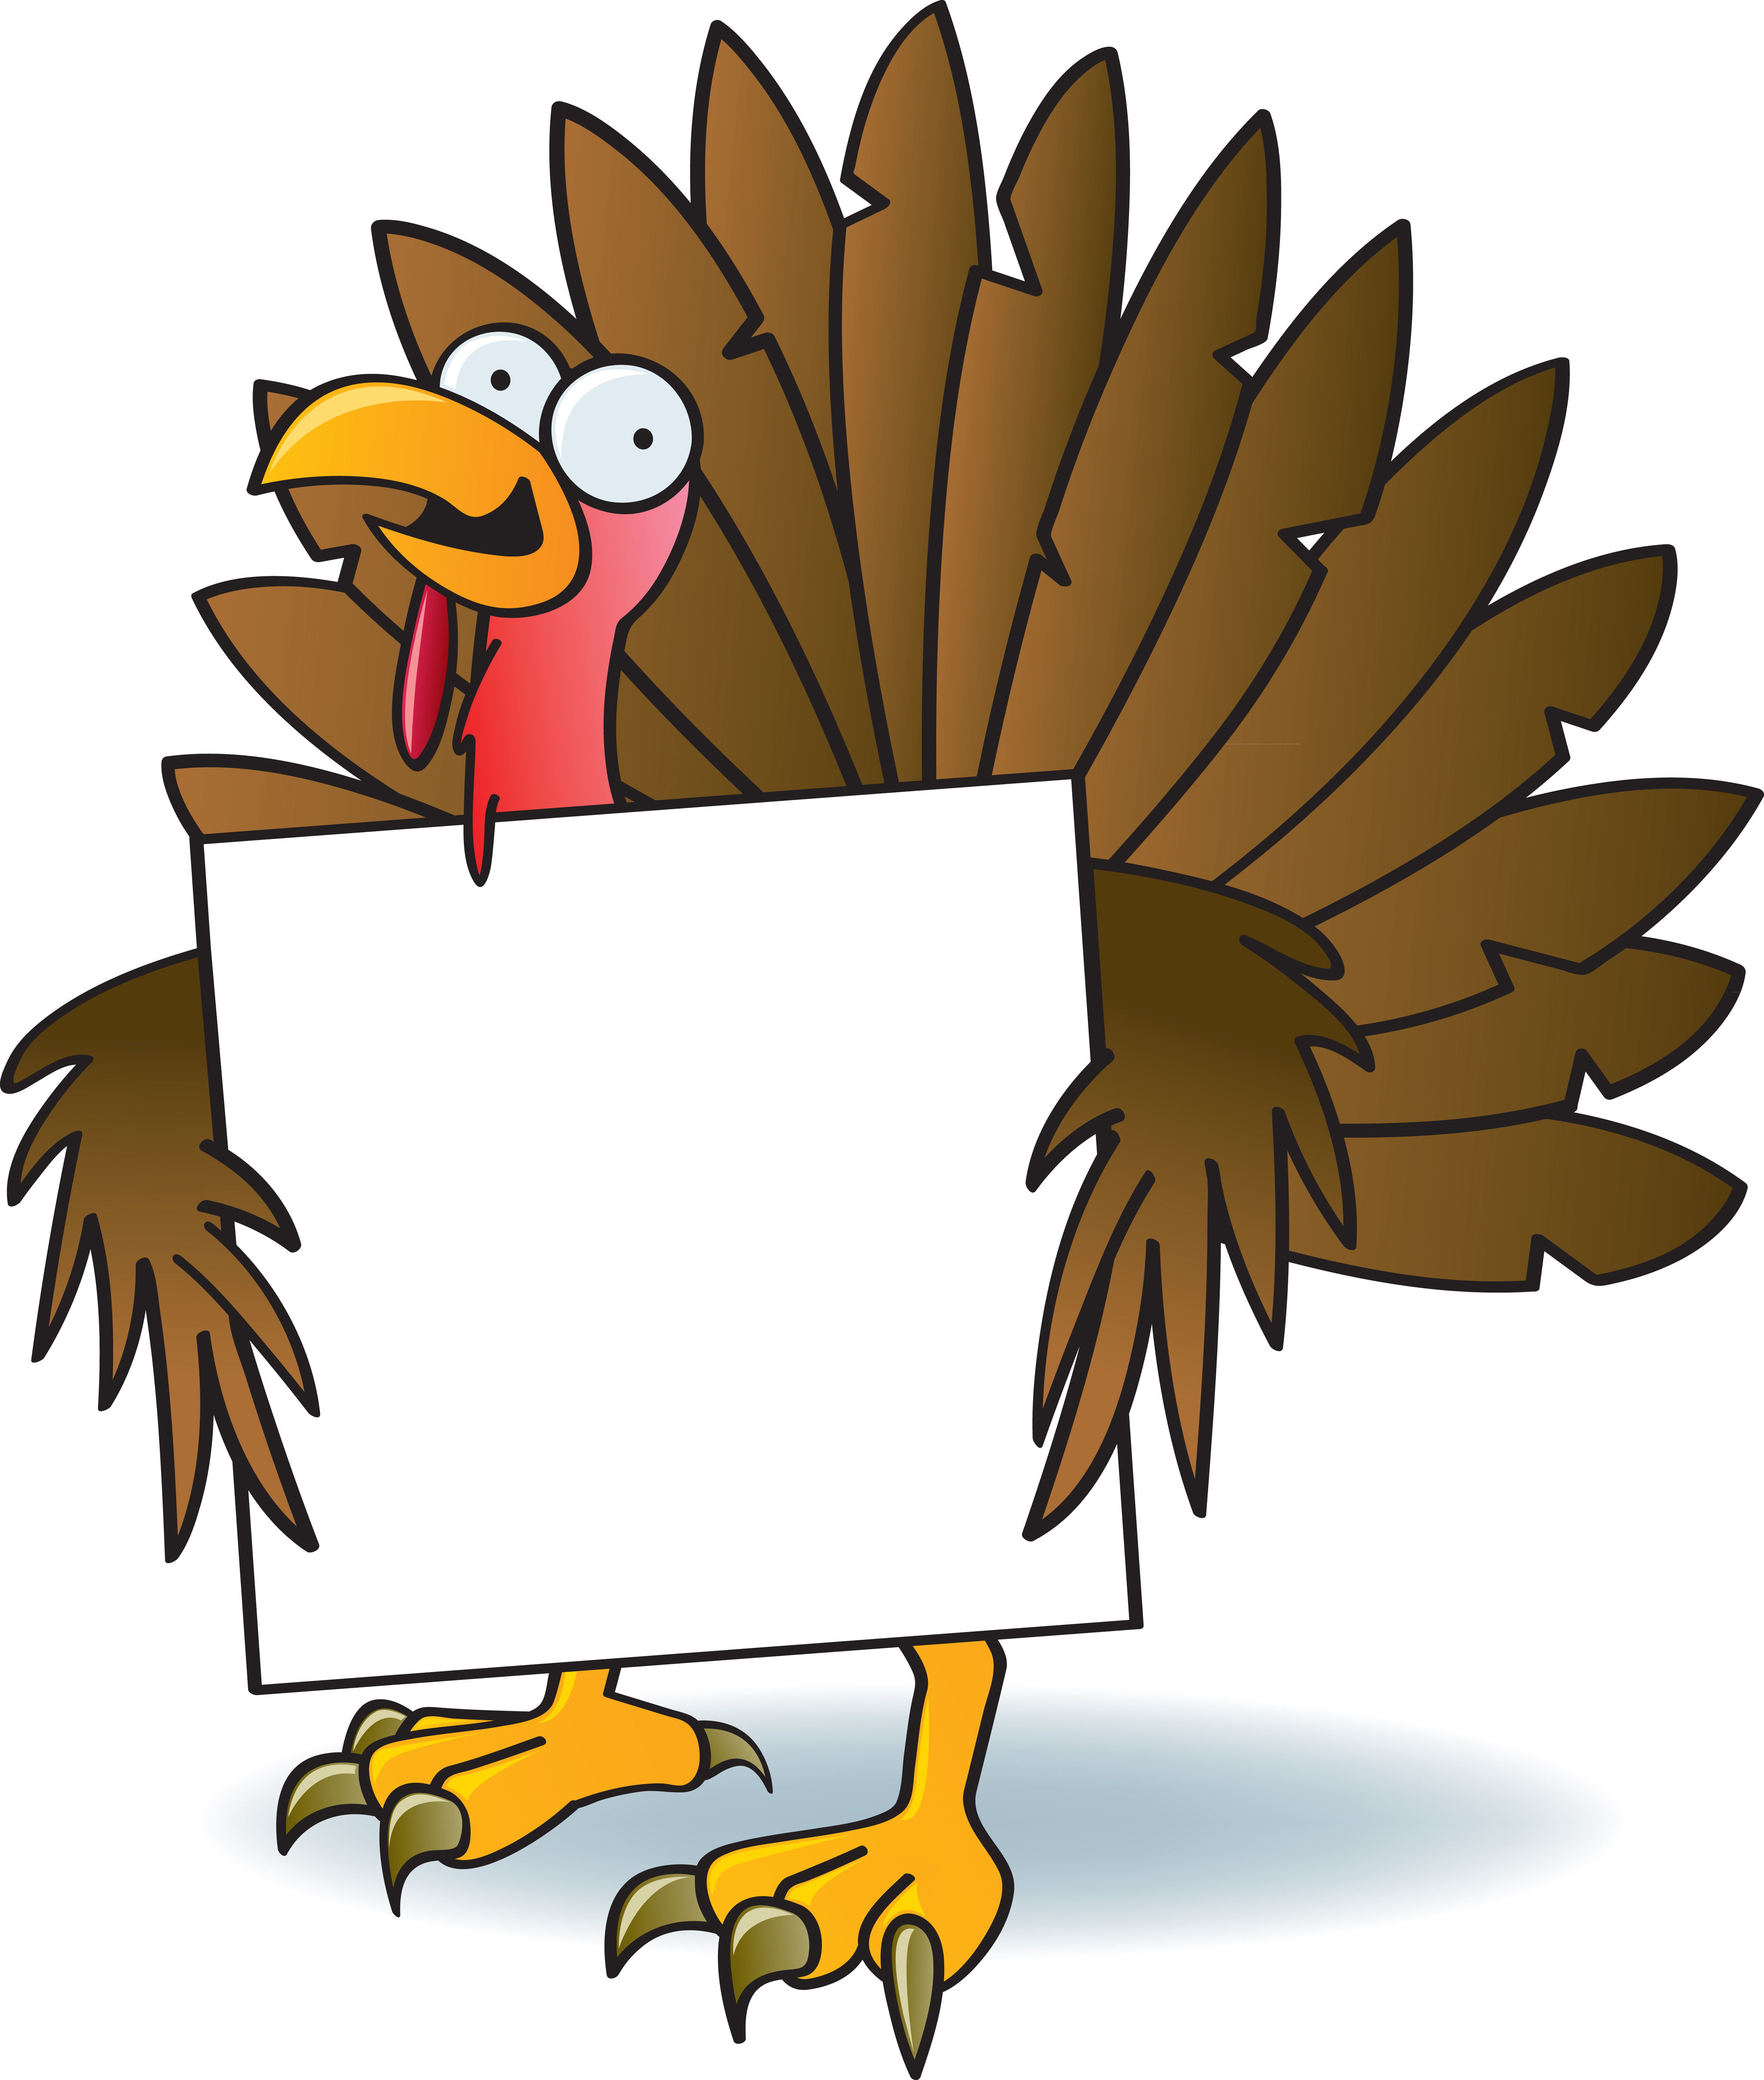 Images For > Lean Turkey Cartoon